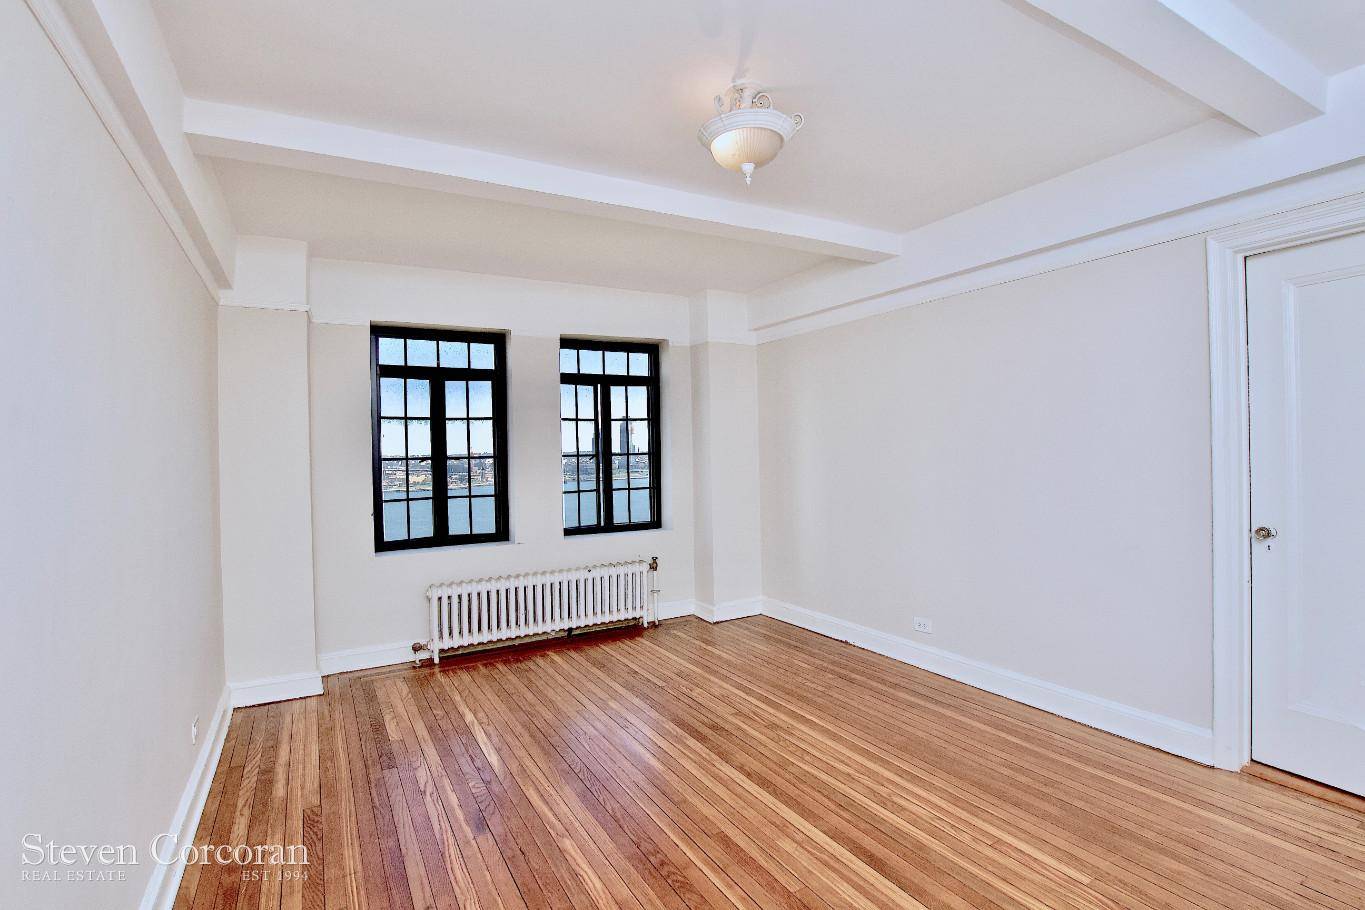 NEW LISTING IN WINDSOR TOWERBright One Bedroom with important upgrades in Tudor City's Windsor Tower New Landmark approved casement windows throughout Through wall HVAC systemThe windows and HVAC represent a ...